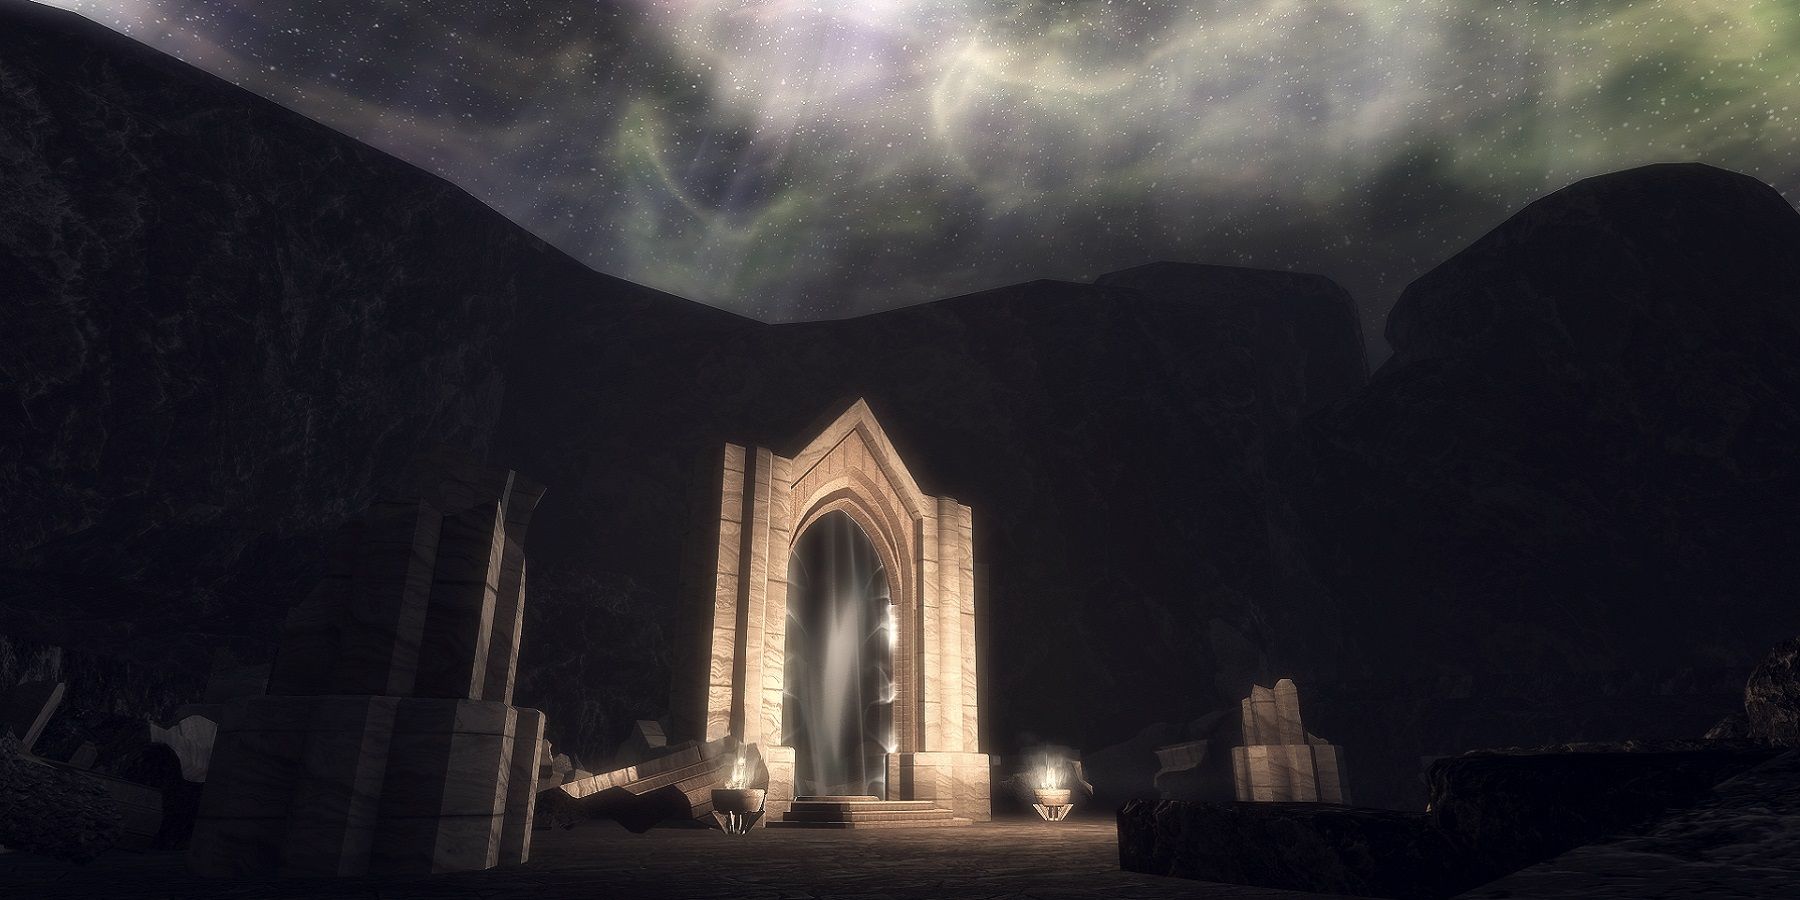 Image from the Battle Grounds mod for Skyrim showing the entrance to a portal.